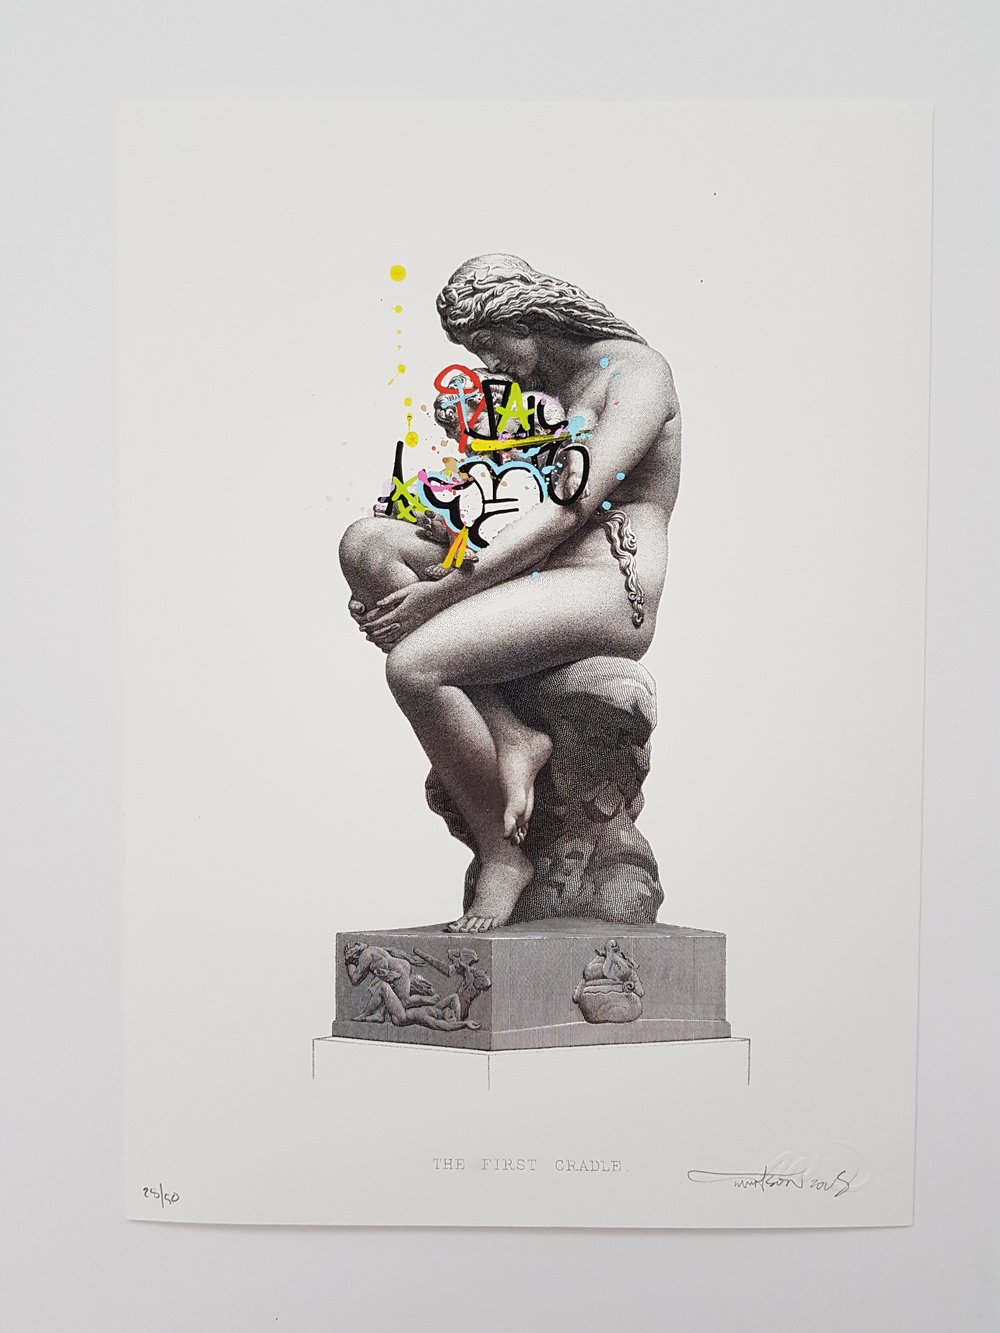 MARTIN WHATSON - THE FIRST CRADLE - 35CM X 25CM - HAND FINISHED LTD ED 50 EACH UNIQUE 